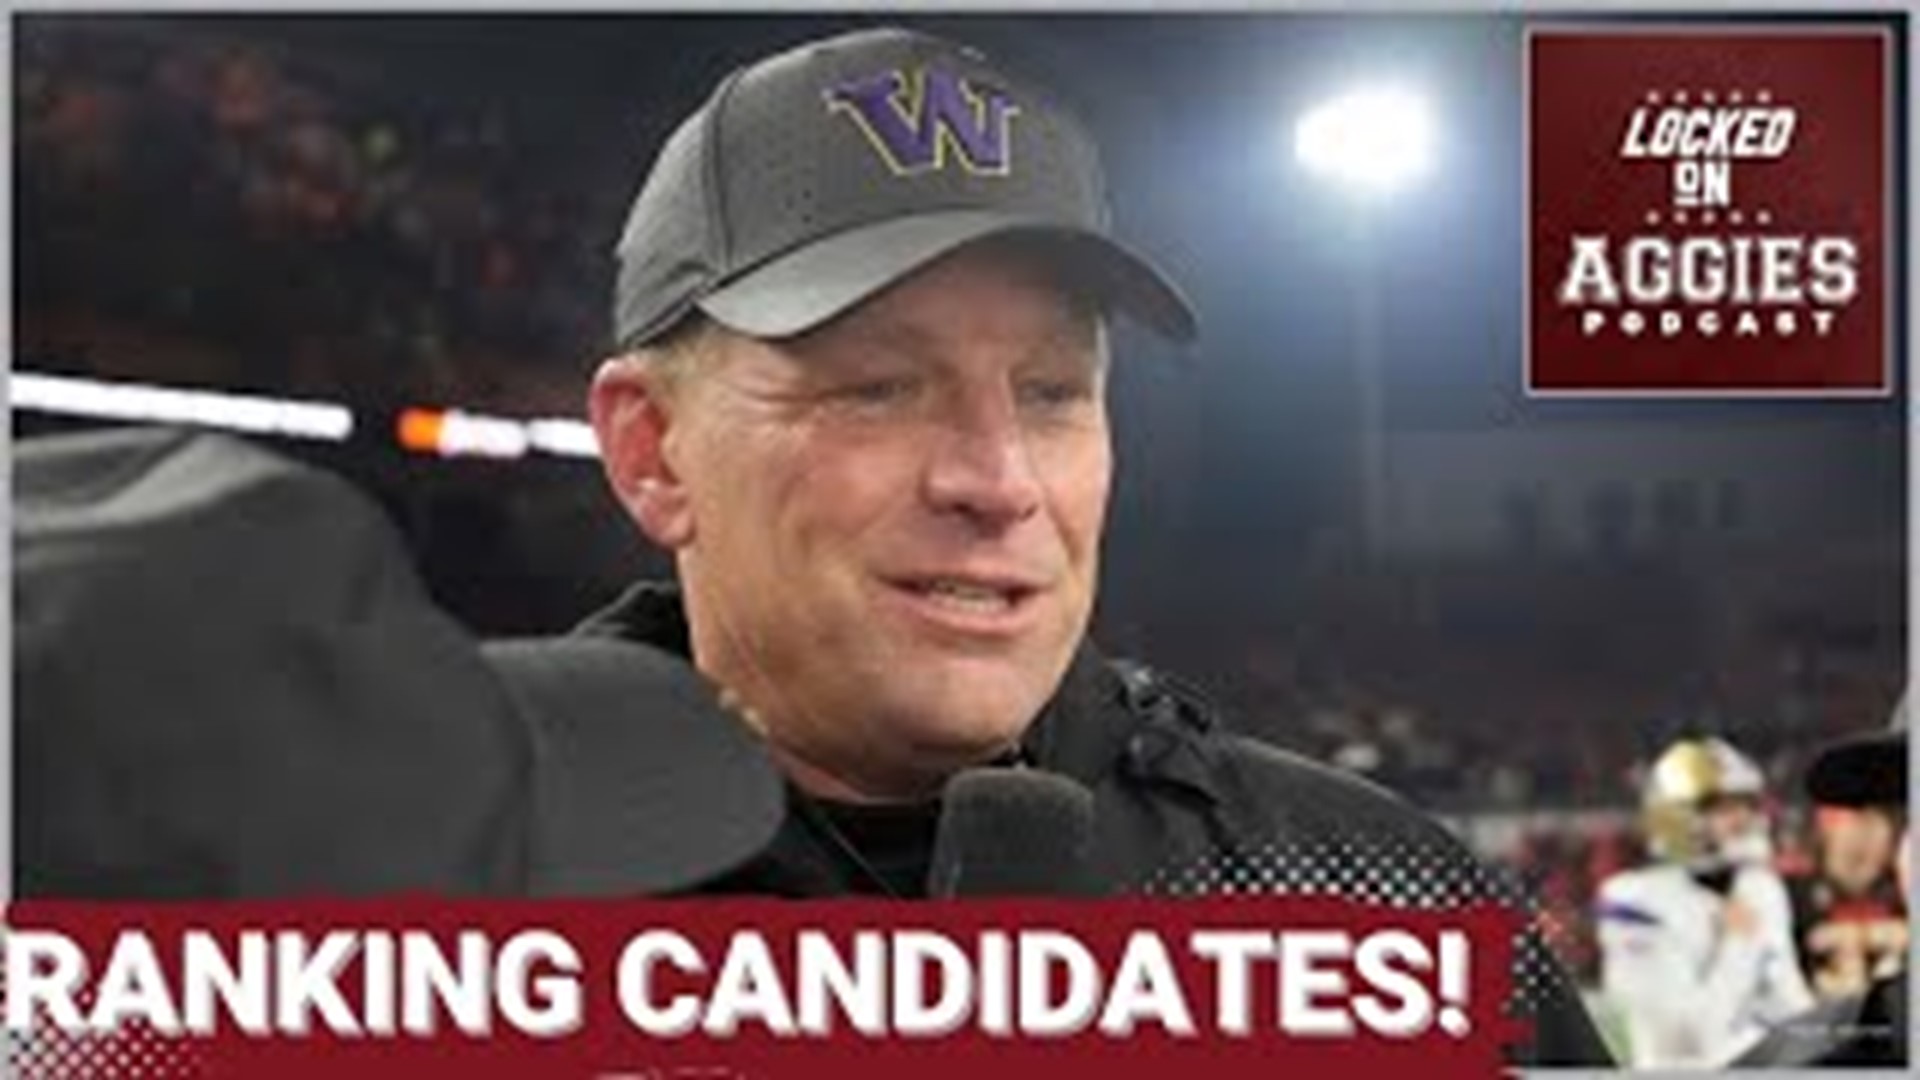 On today's episode of Locked On Aggies, host Andrew Stefaniak puts the head coach candidates for Texas A&M's head coaching job into categories.